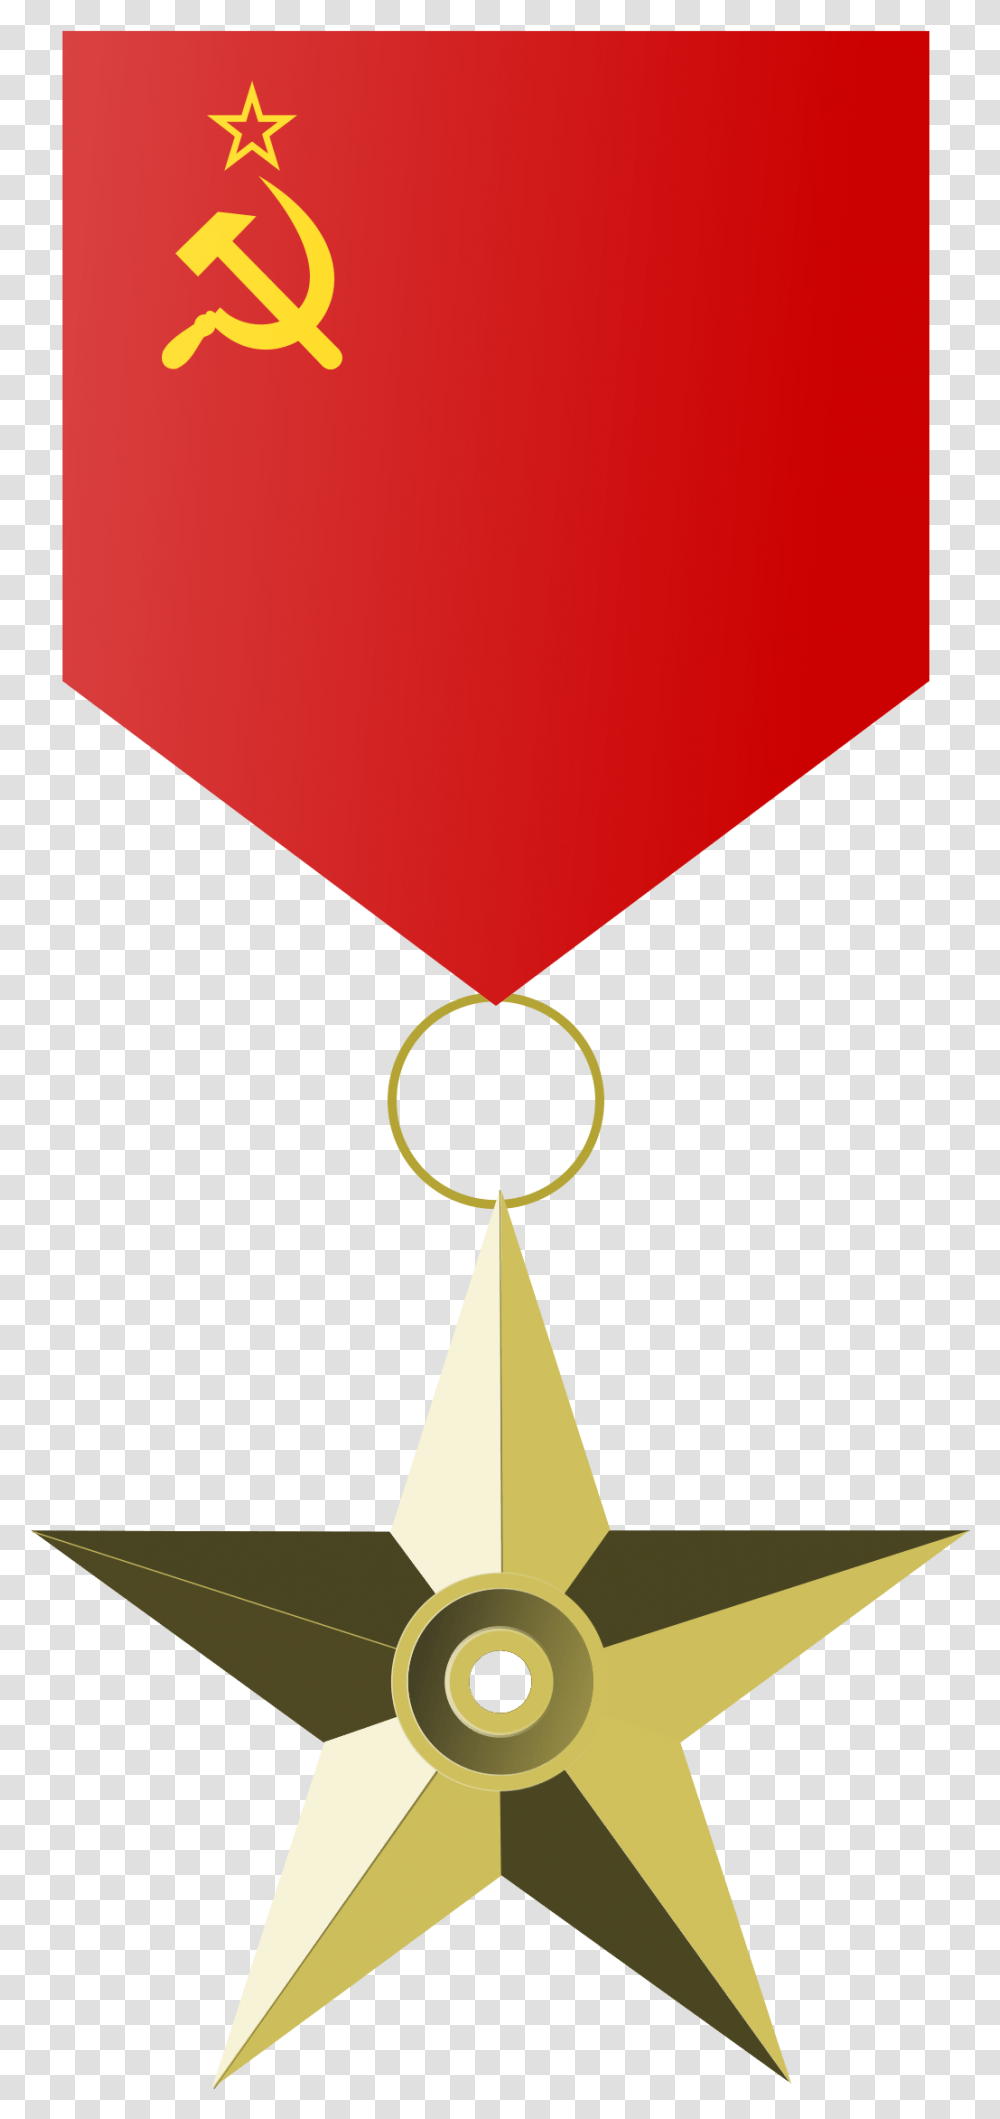 Filesoviet Union Order Of Meritsvg Wikimedia Commons Hammer And Sickle, Gold, Triangle, Heart Transparent Png